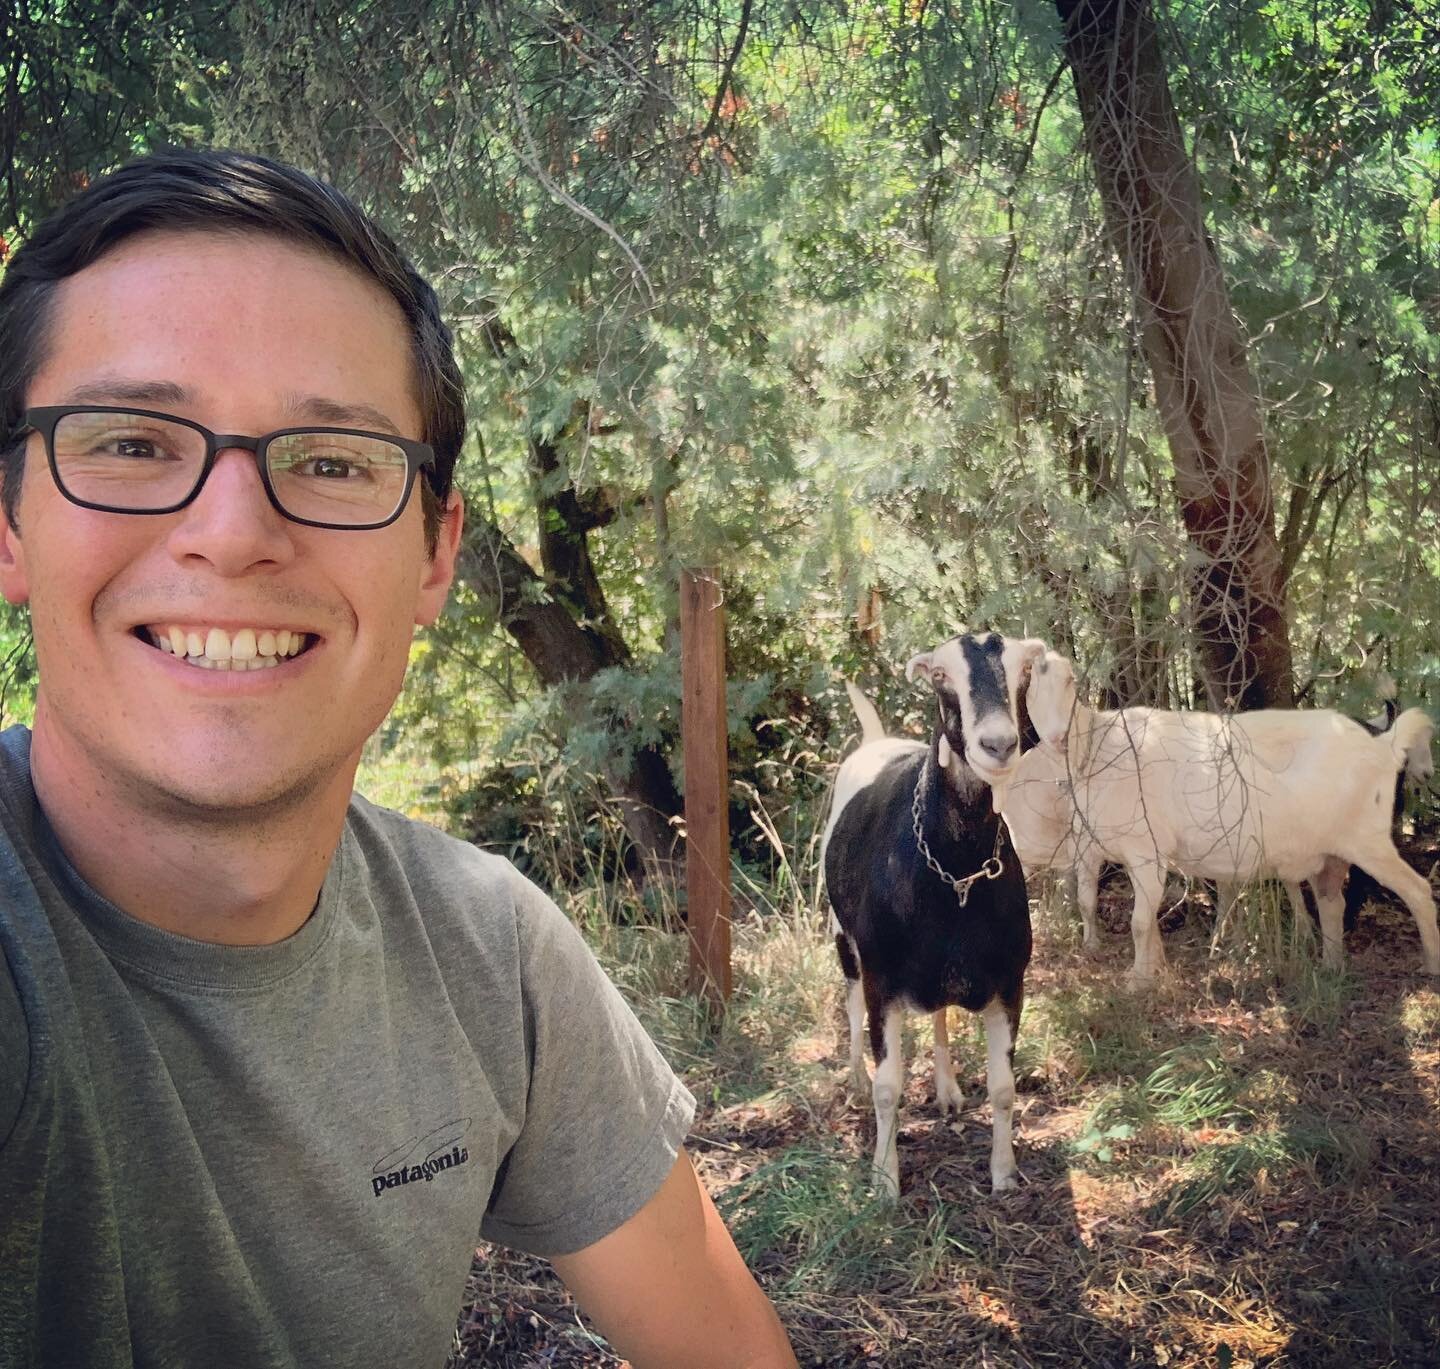 Today we welcomed five new goat friends to Alta Orsa! They were rehomed from near by Anderson Valley. They will help us clear overgrown brush and lots of poison oak all around the property to reduce fire risk&hellip; while leaving fertilizer pellets 